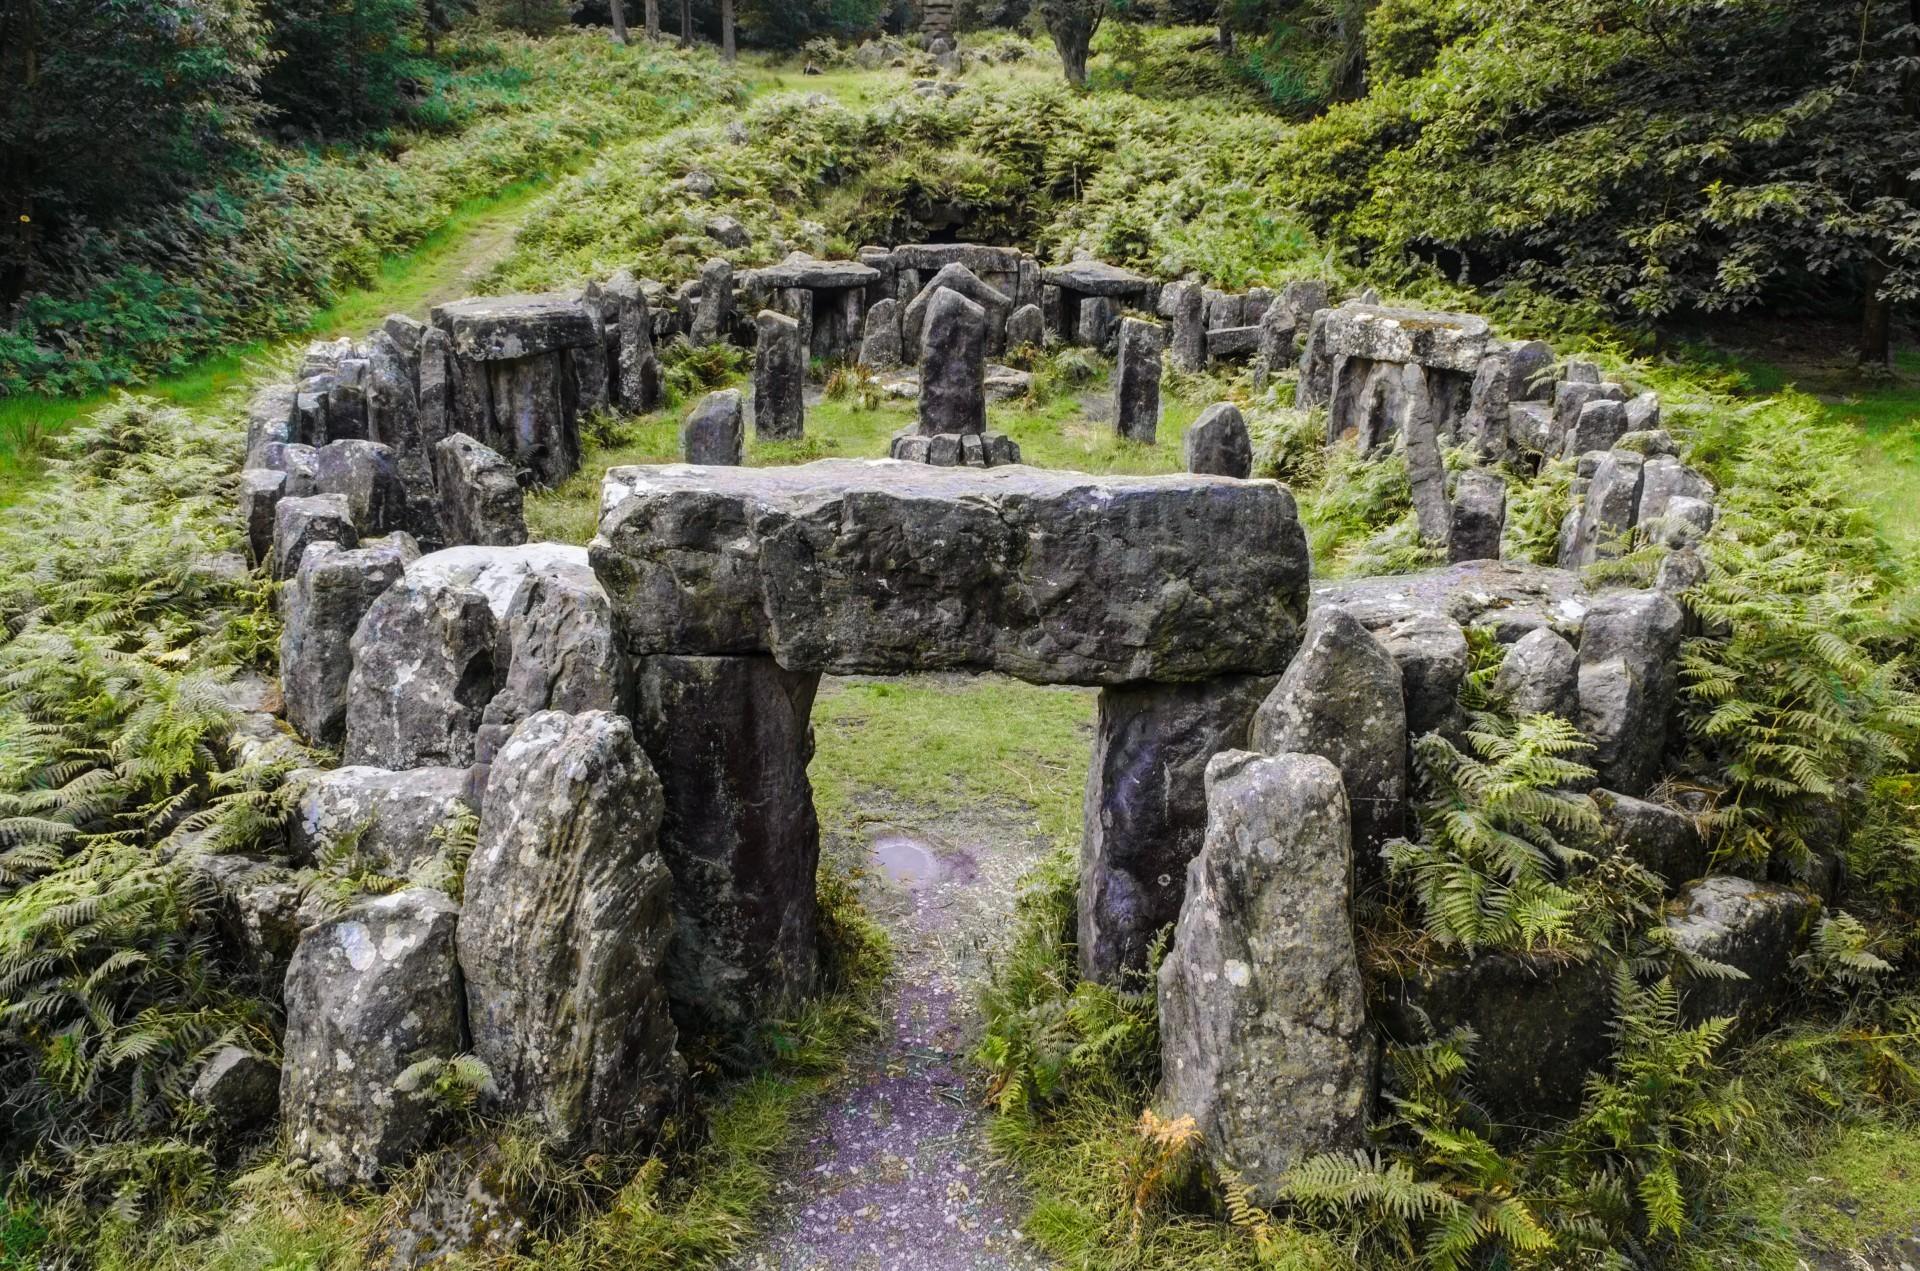 The Ancient History of the Druids In The British Isles